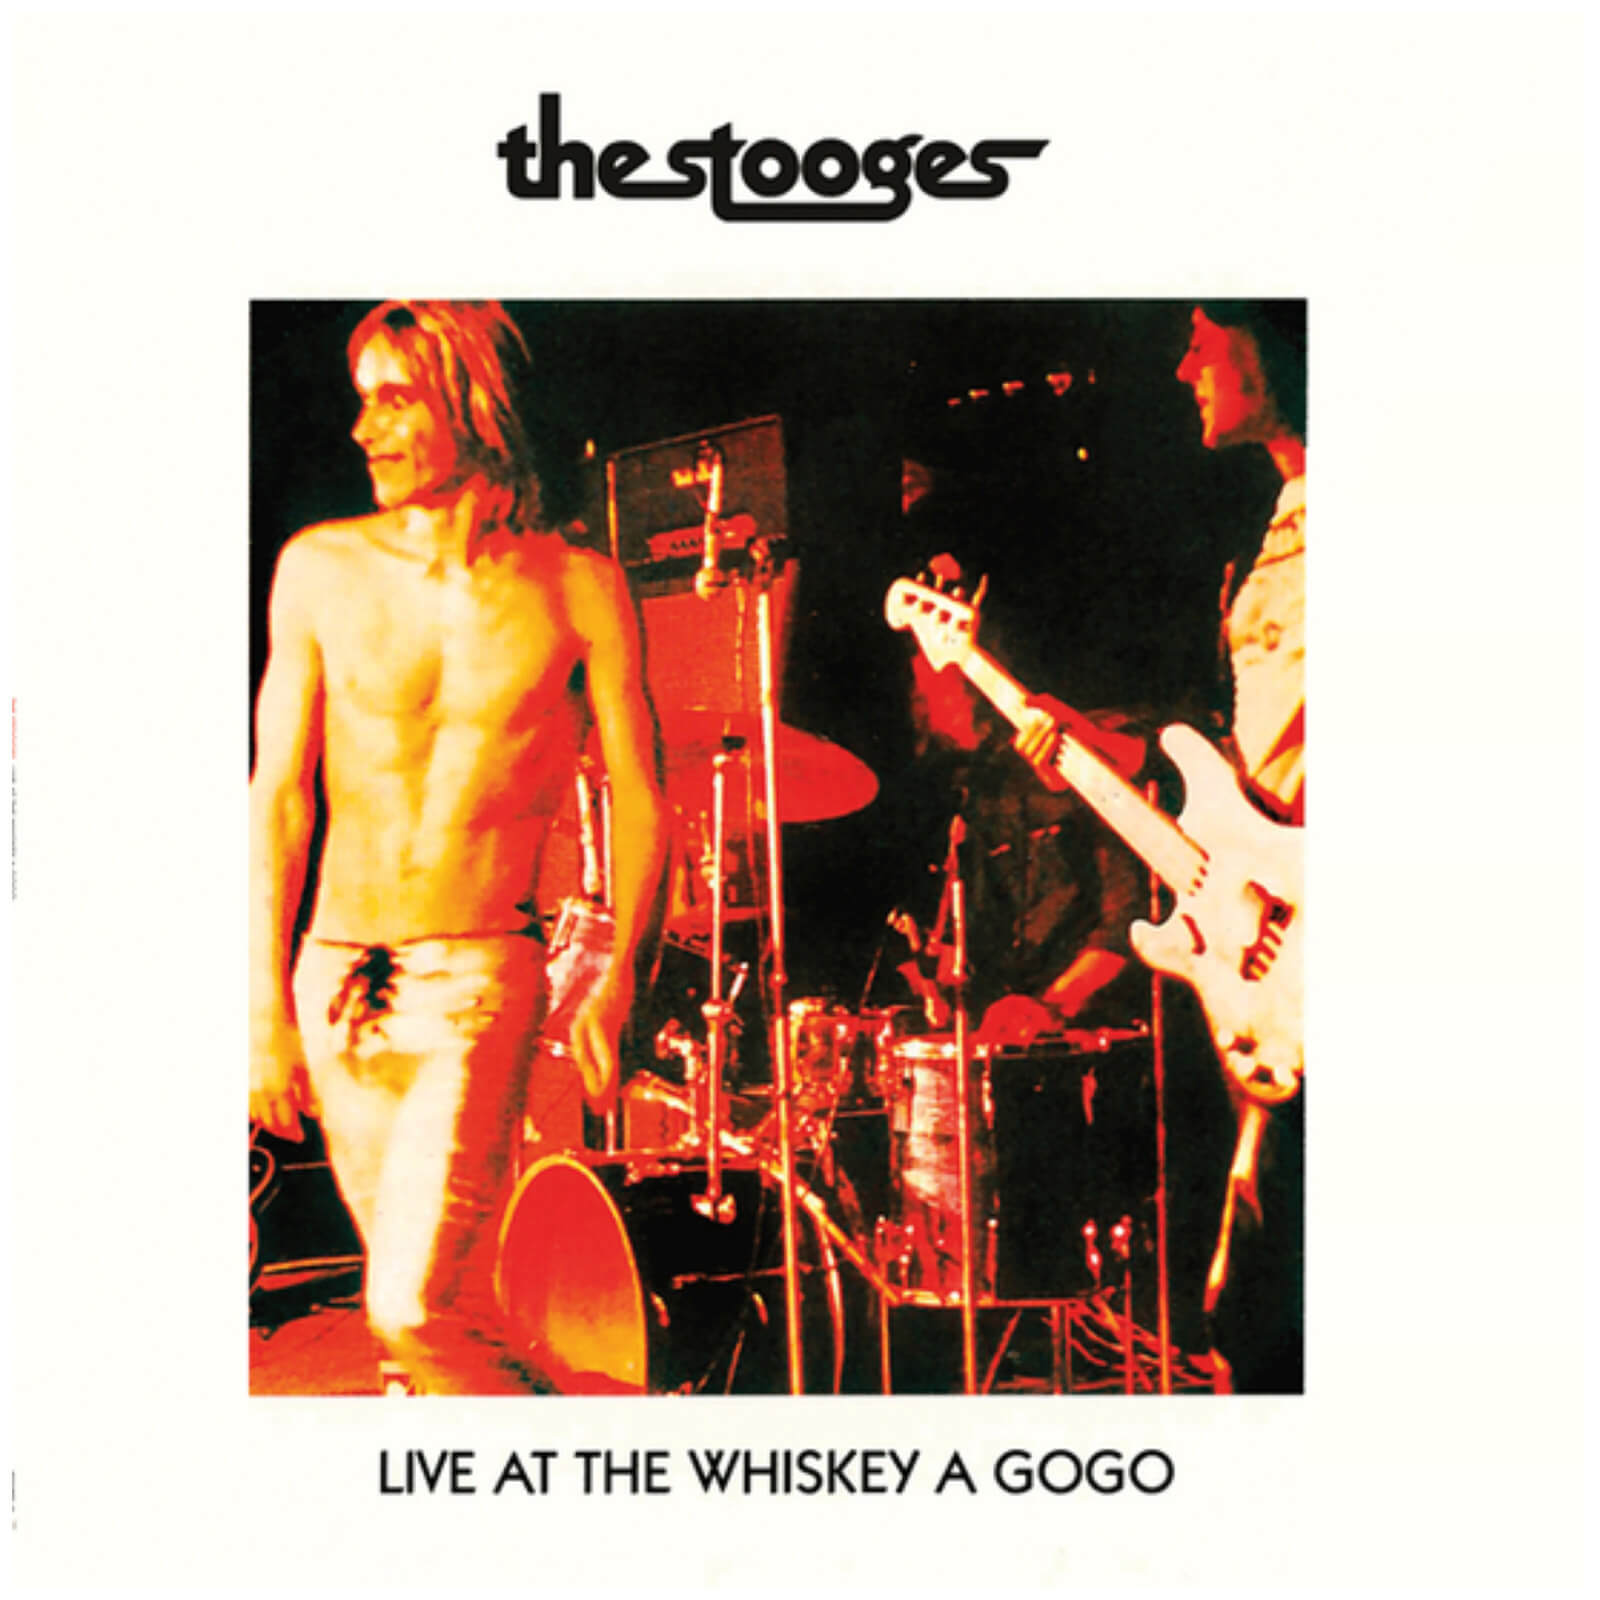 The Stooges - Live At The Whiskey A Gogo LP (White)